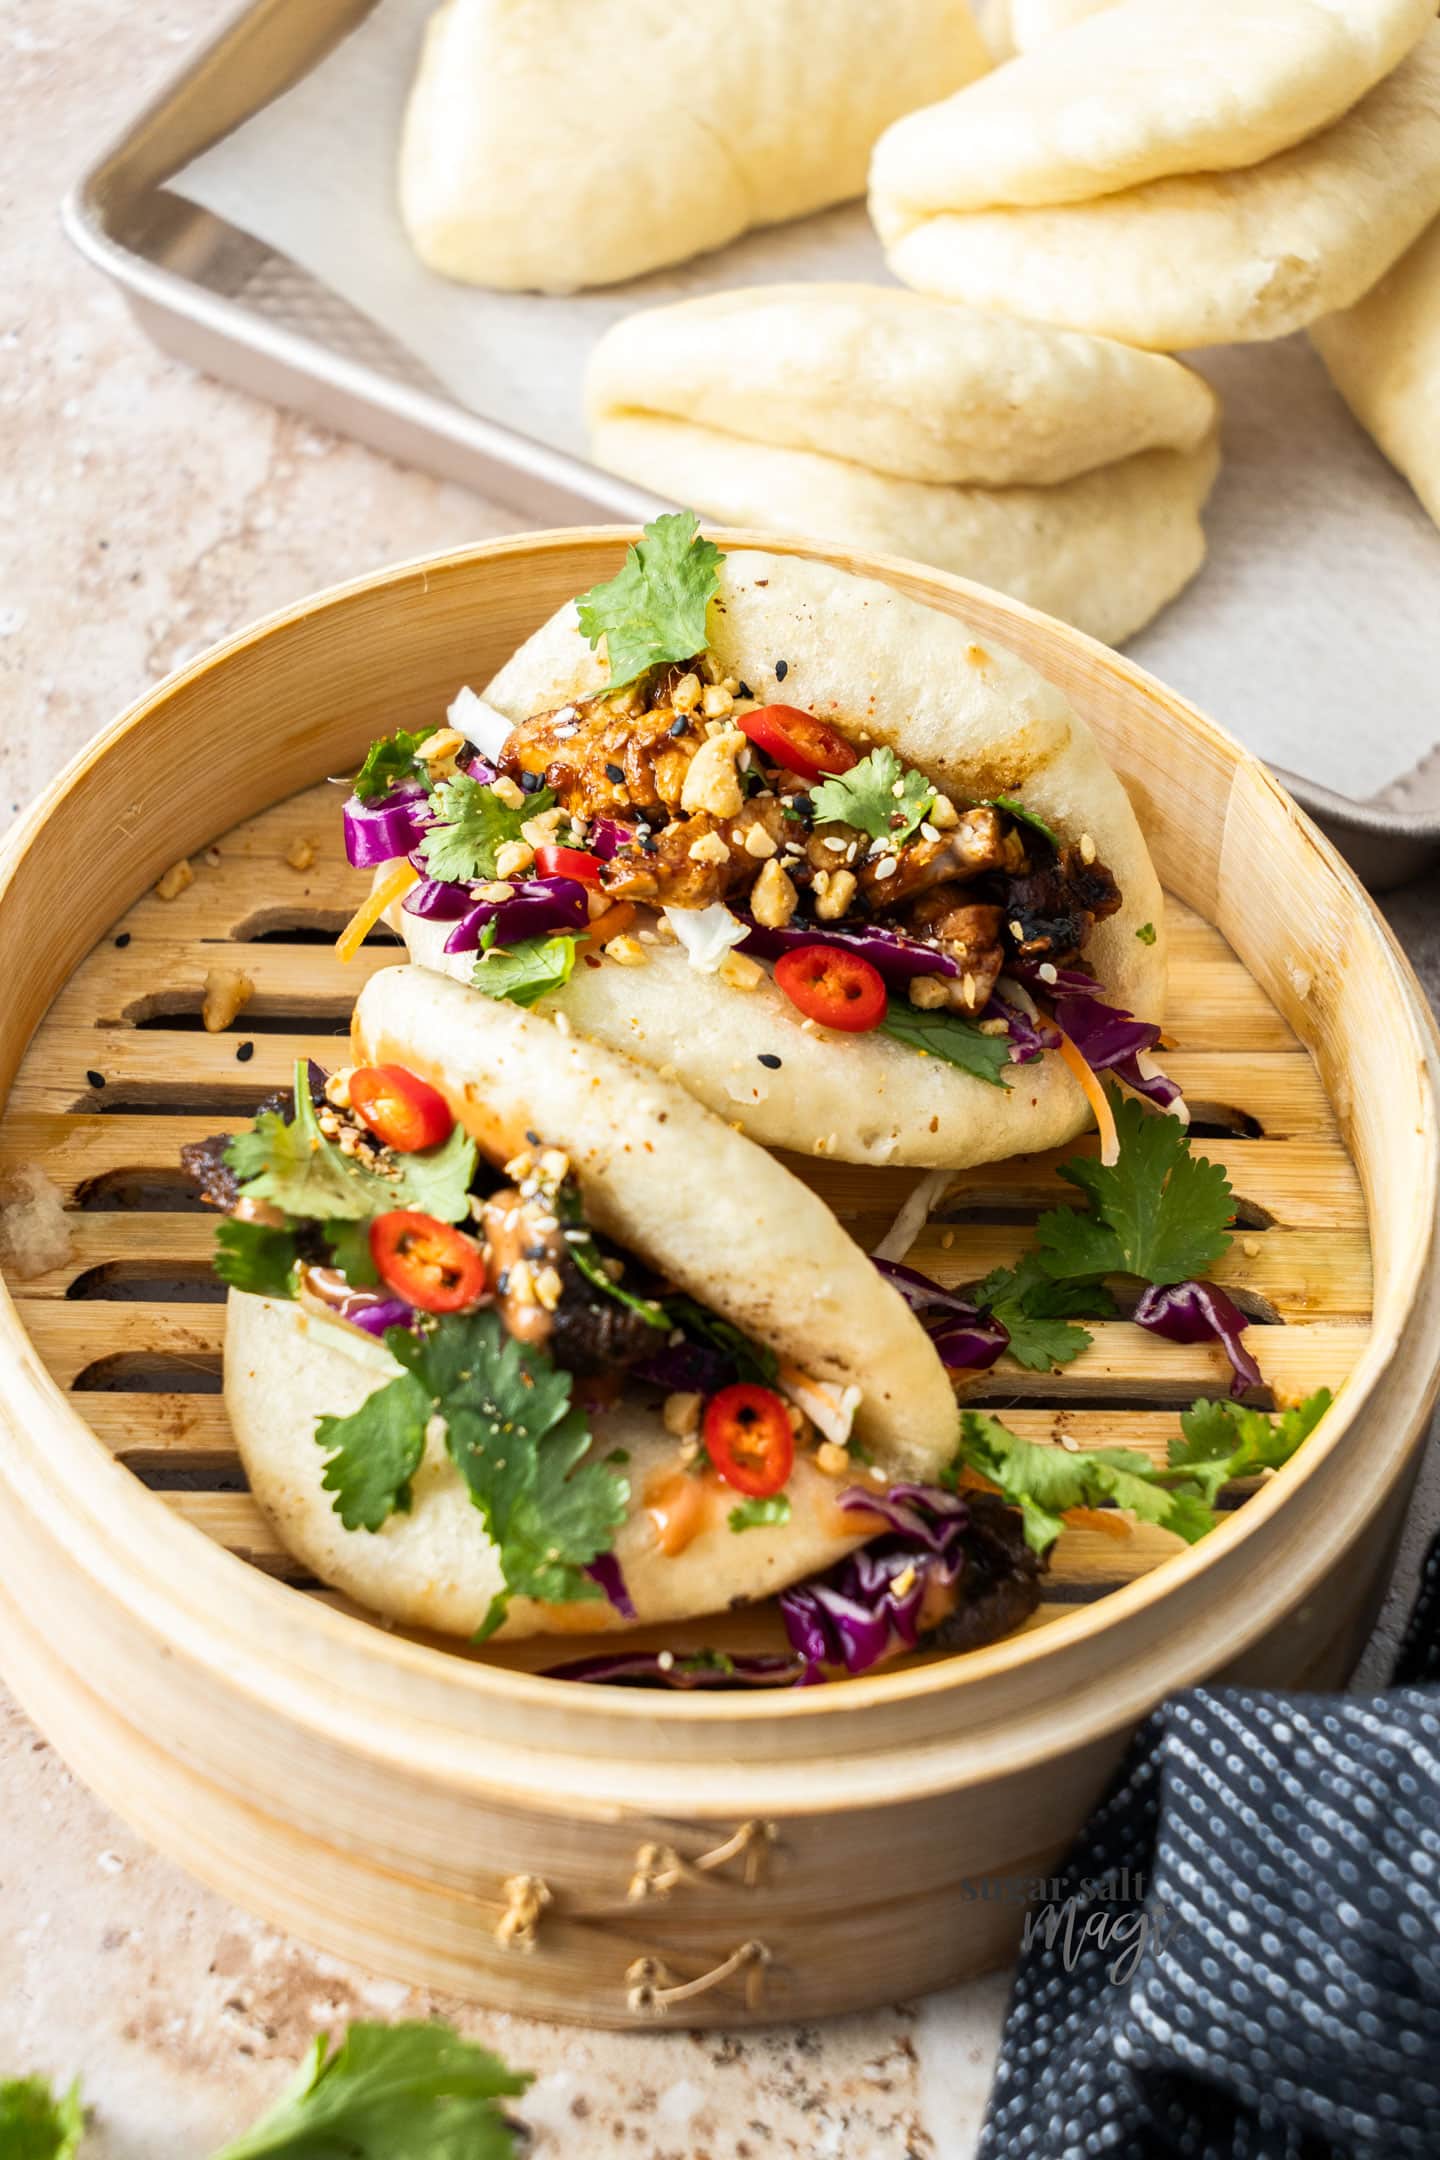 Two filled bao buns in a bamboo steamer.